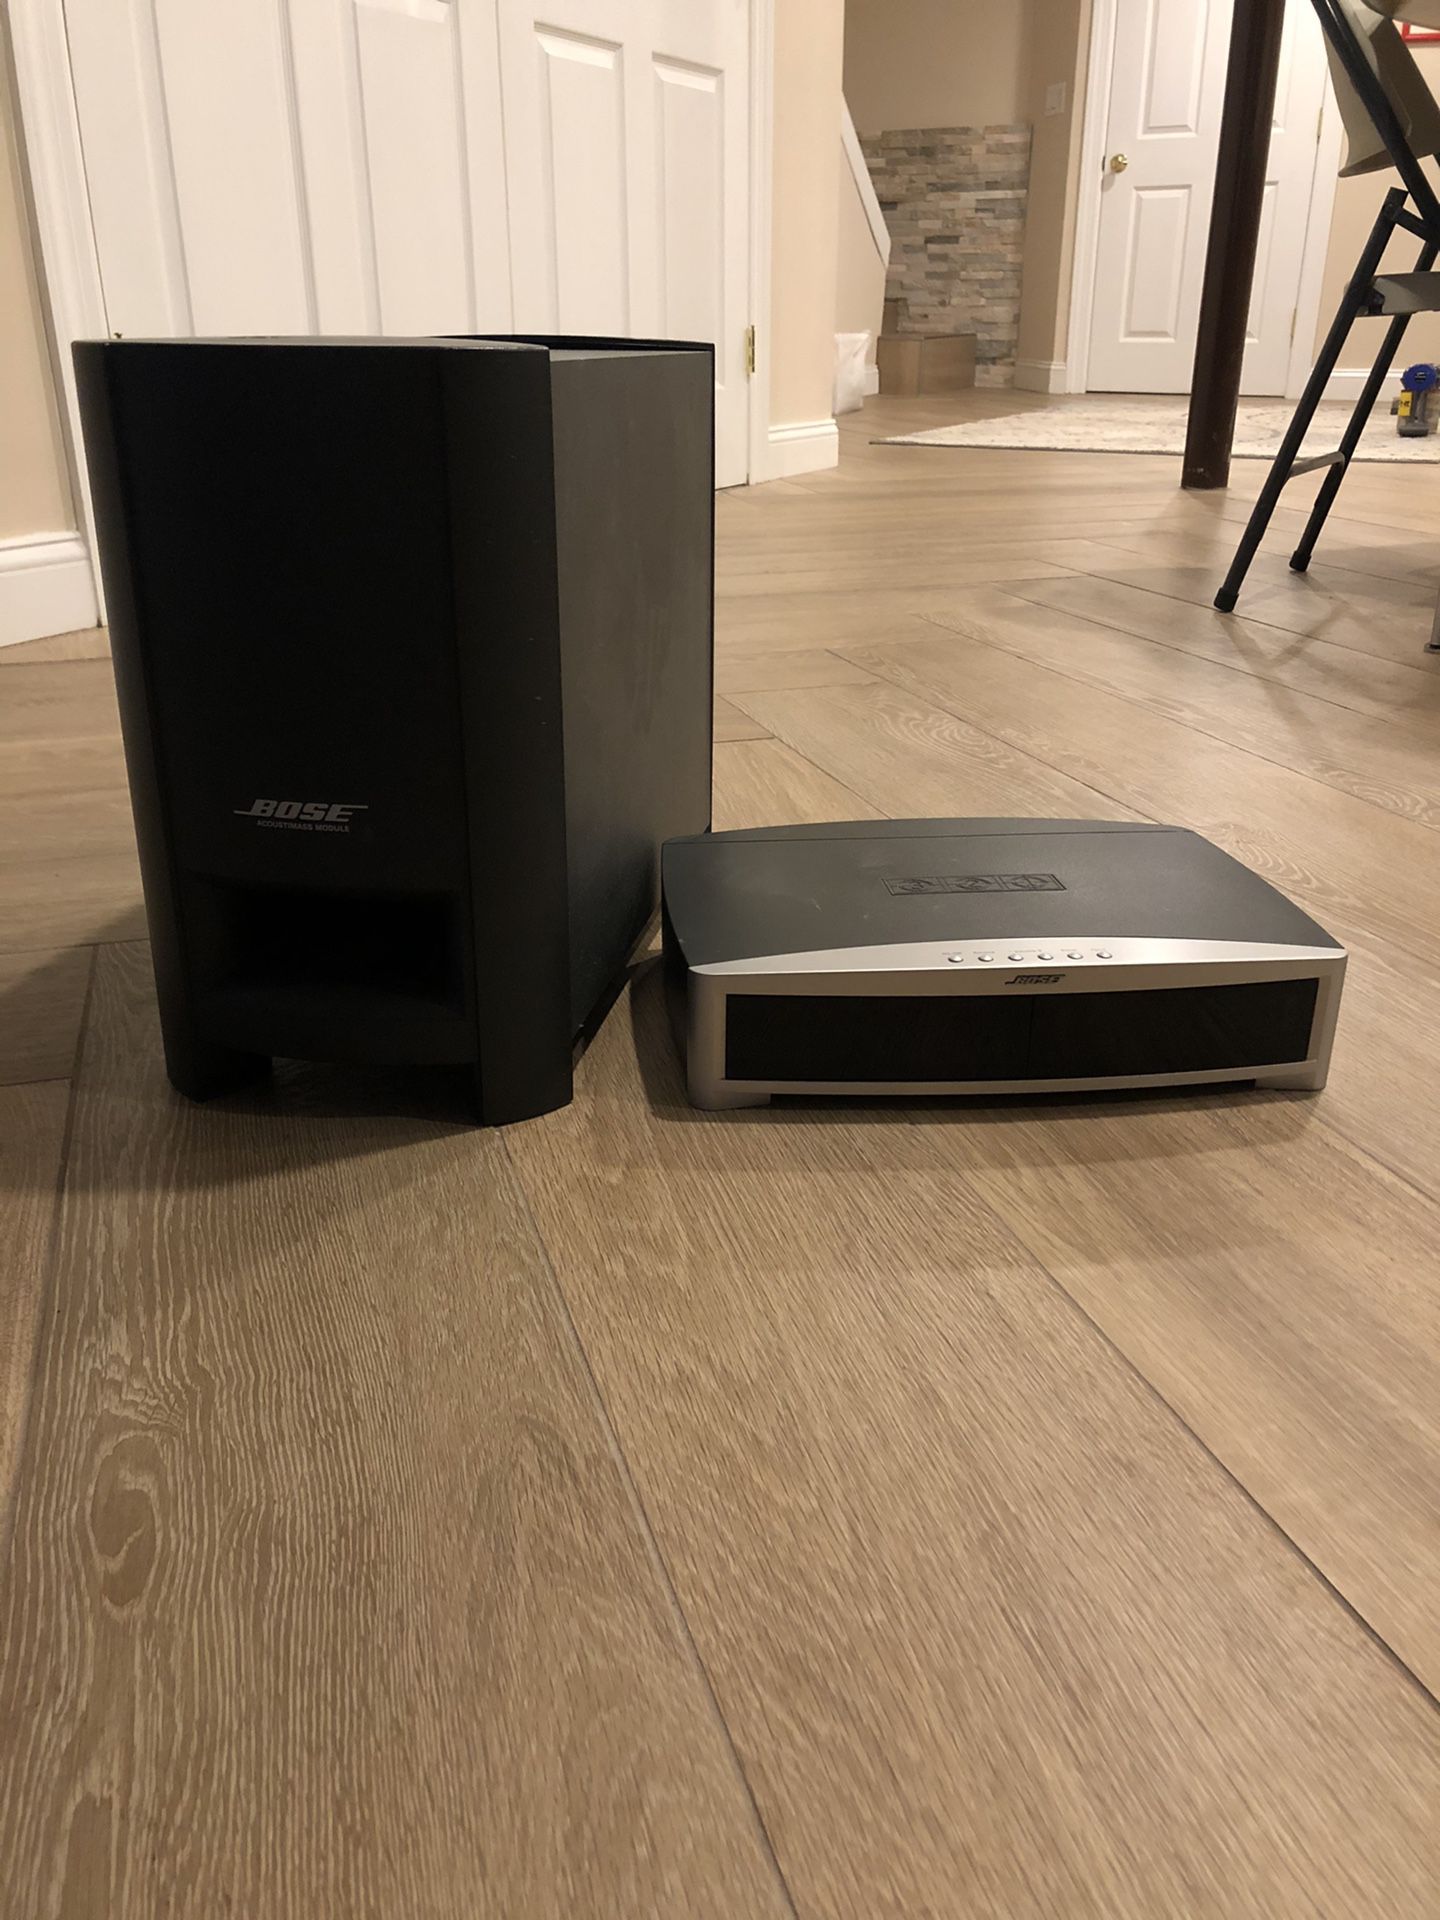 Bose 321 Series III DVD Home Entertainment System